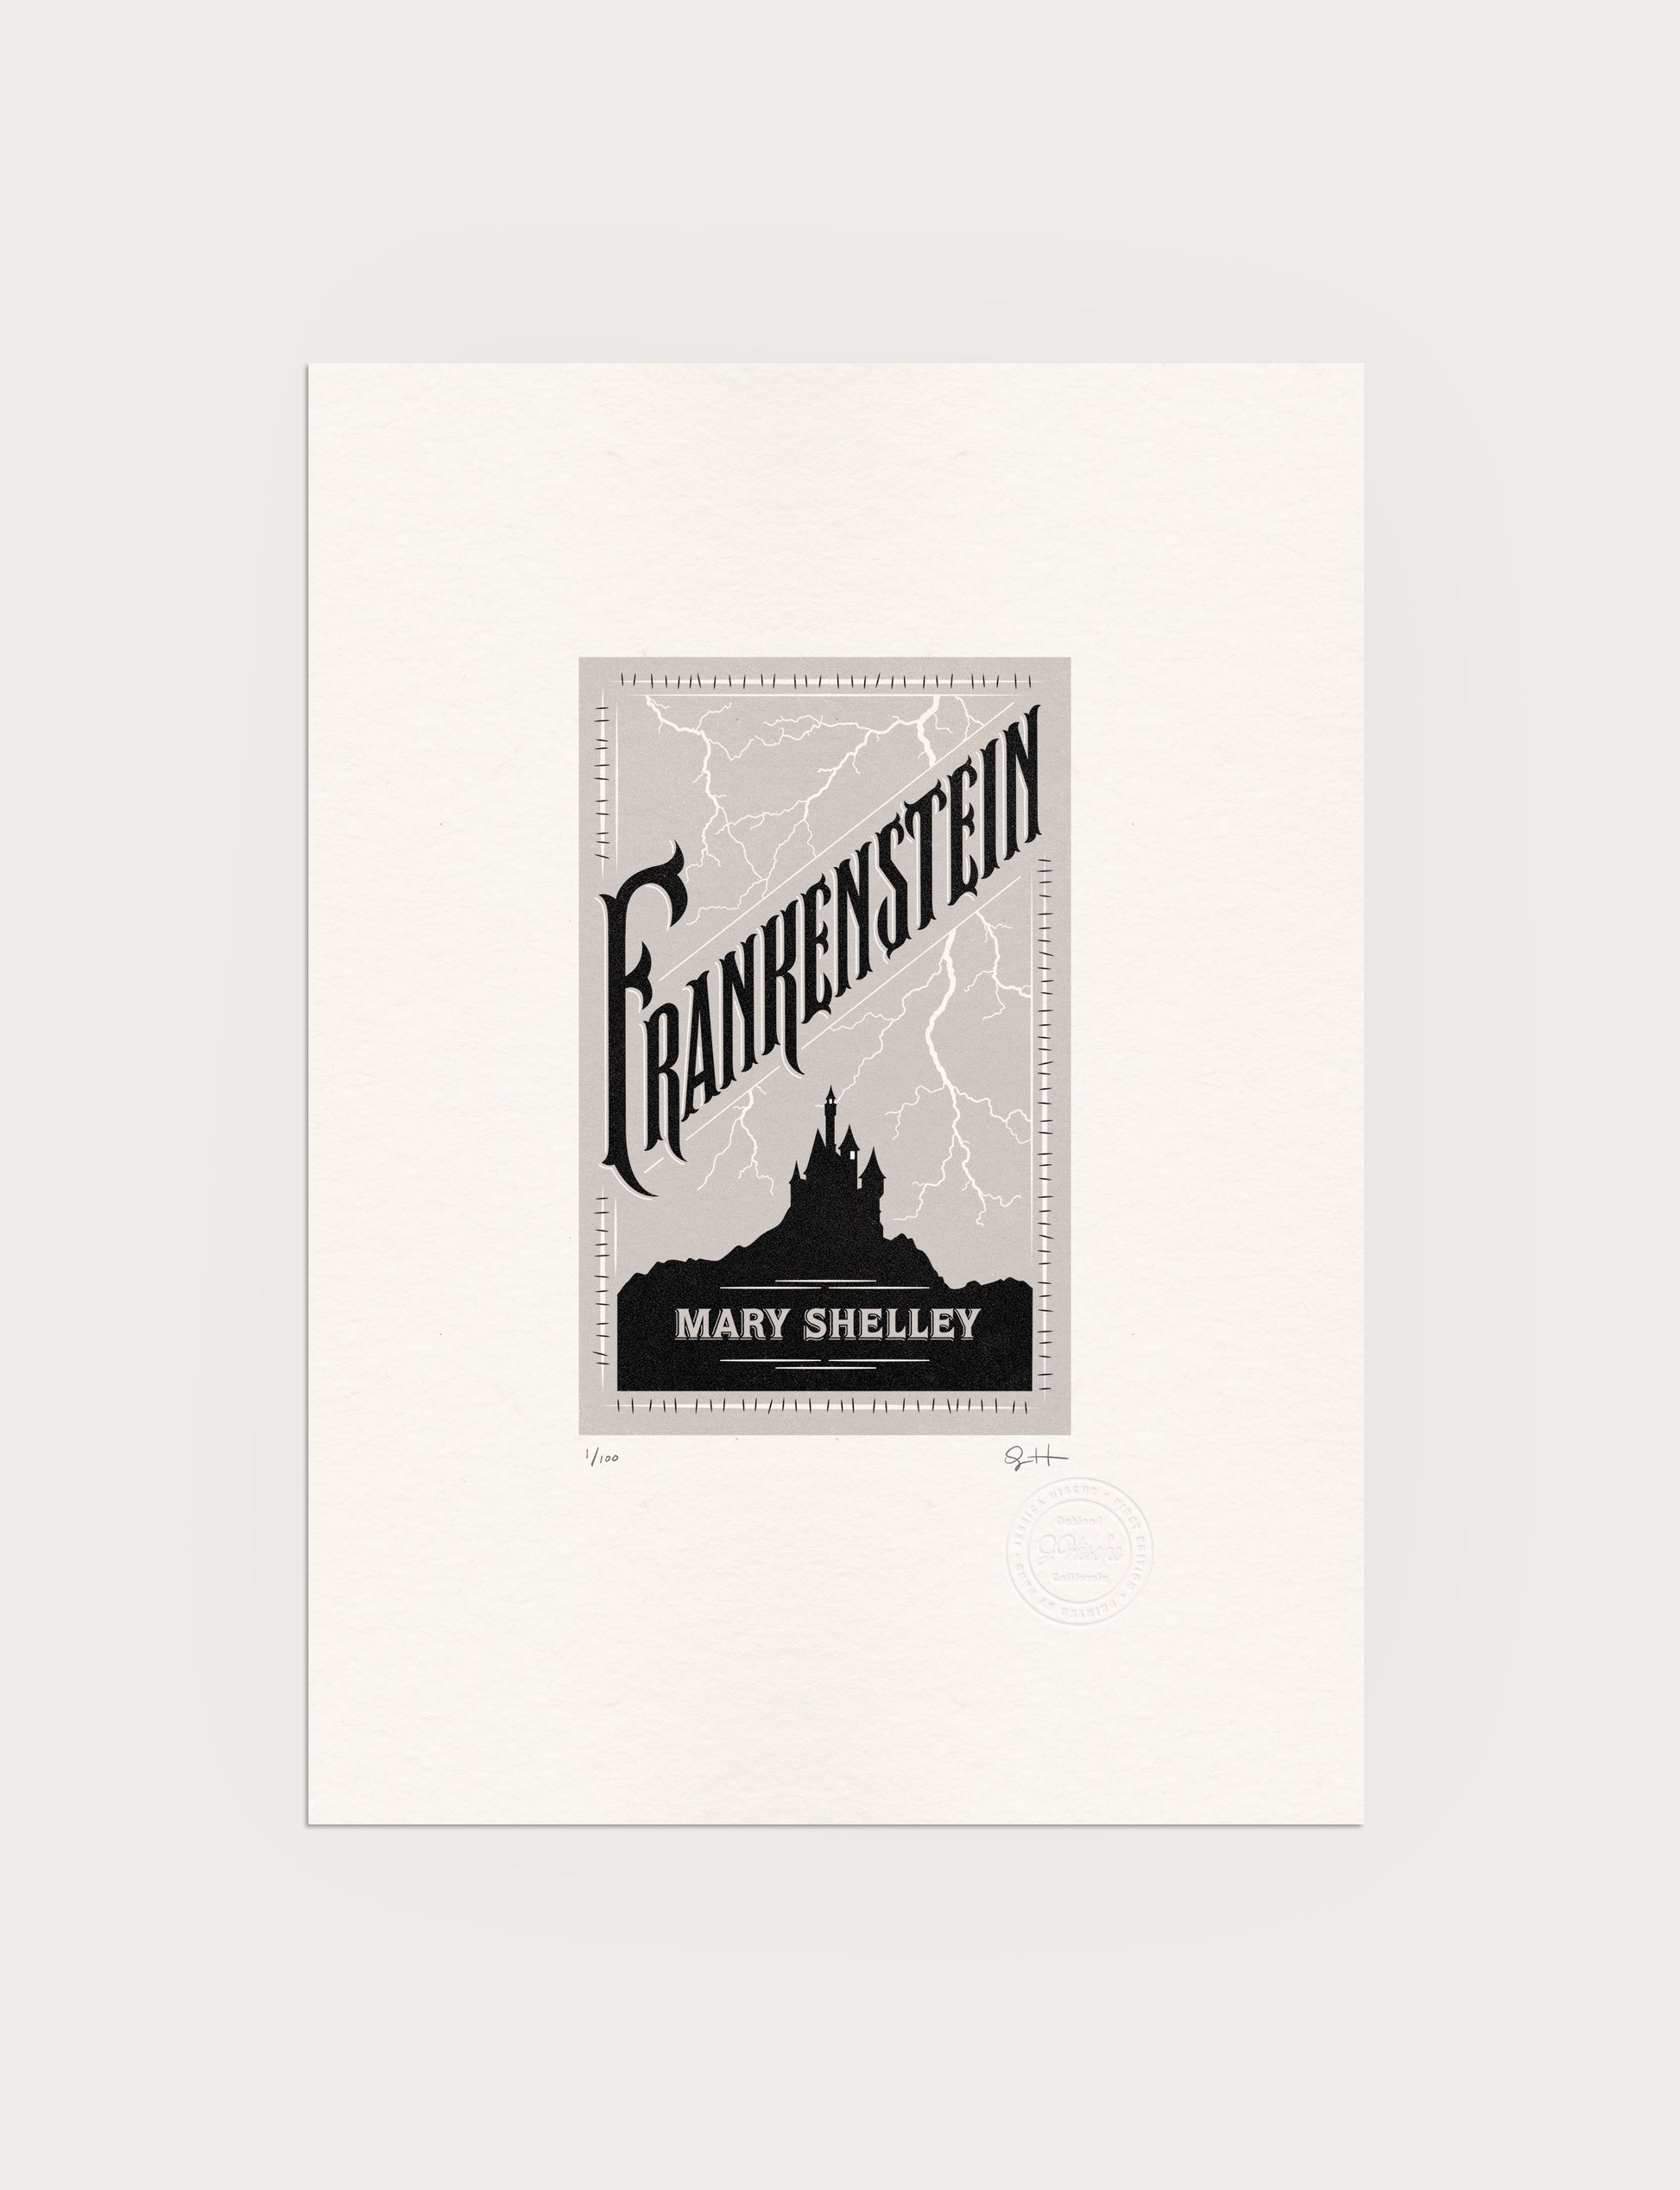 2-color letterpress print in gray and black. Printed artwork is an illustrated book cover of Frankenstein including custom hand lettering.